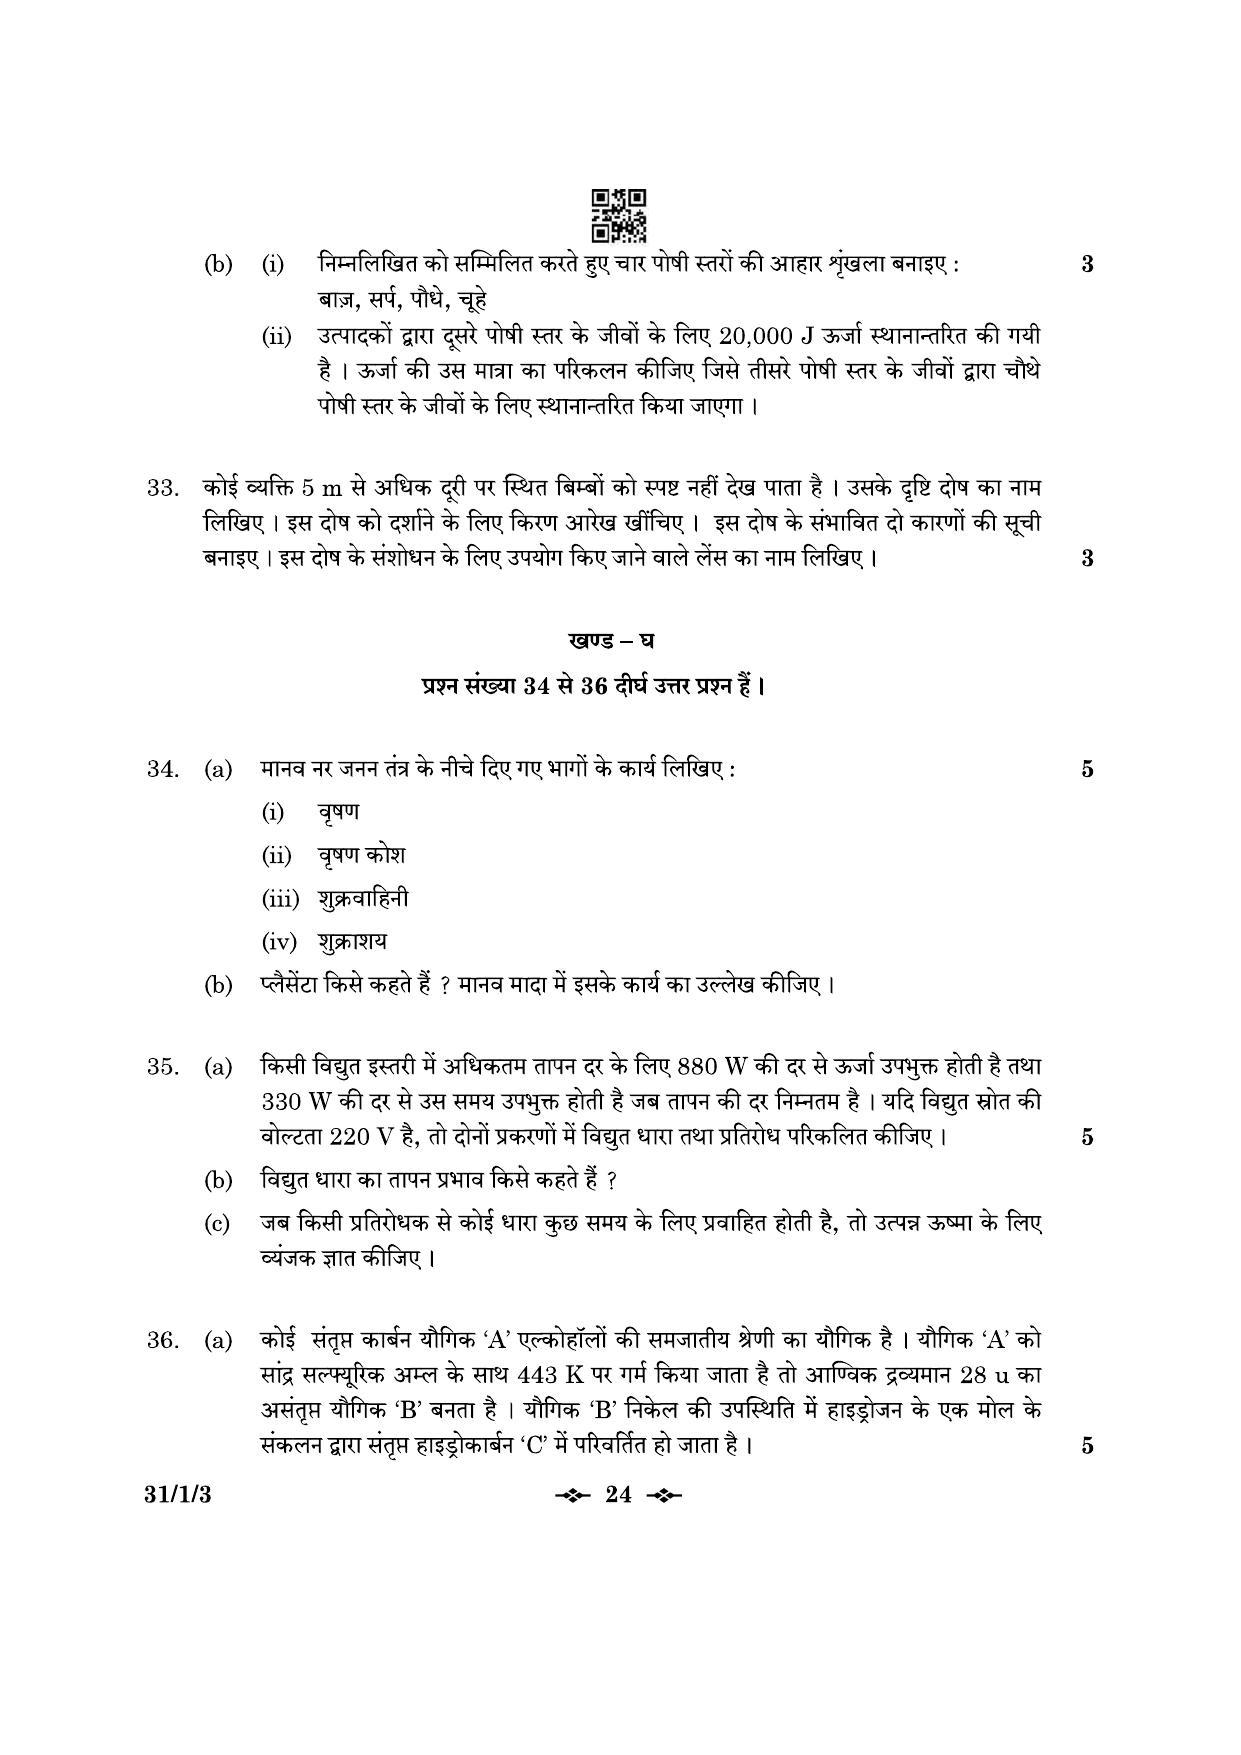 CBSE Class 10 31-1-3 Science 2023 Question Paper - Page 24